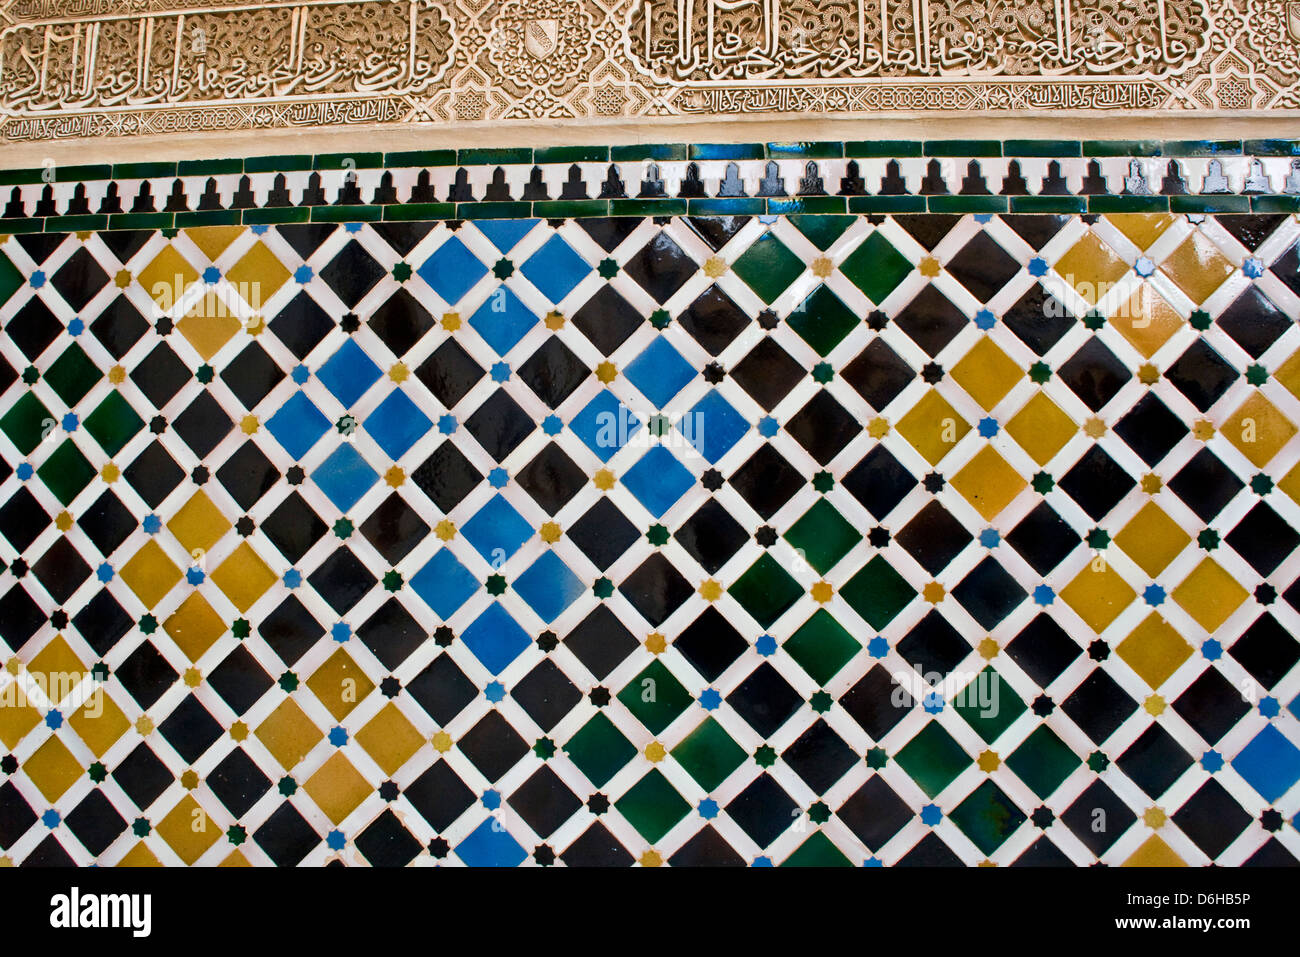 https://c8.alamy.com/comp/D6HB5P/intricate-stucco-islamic-artwork-and-repetitive-tile-pattern-alhambra-D6HB5P.jpg